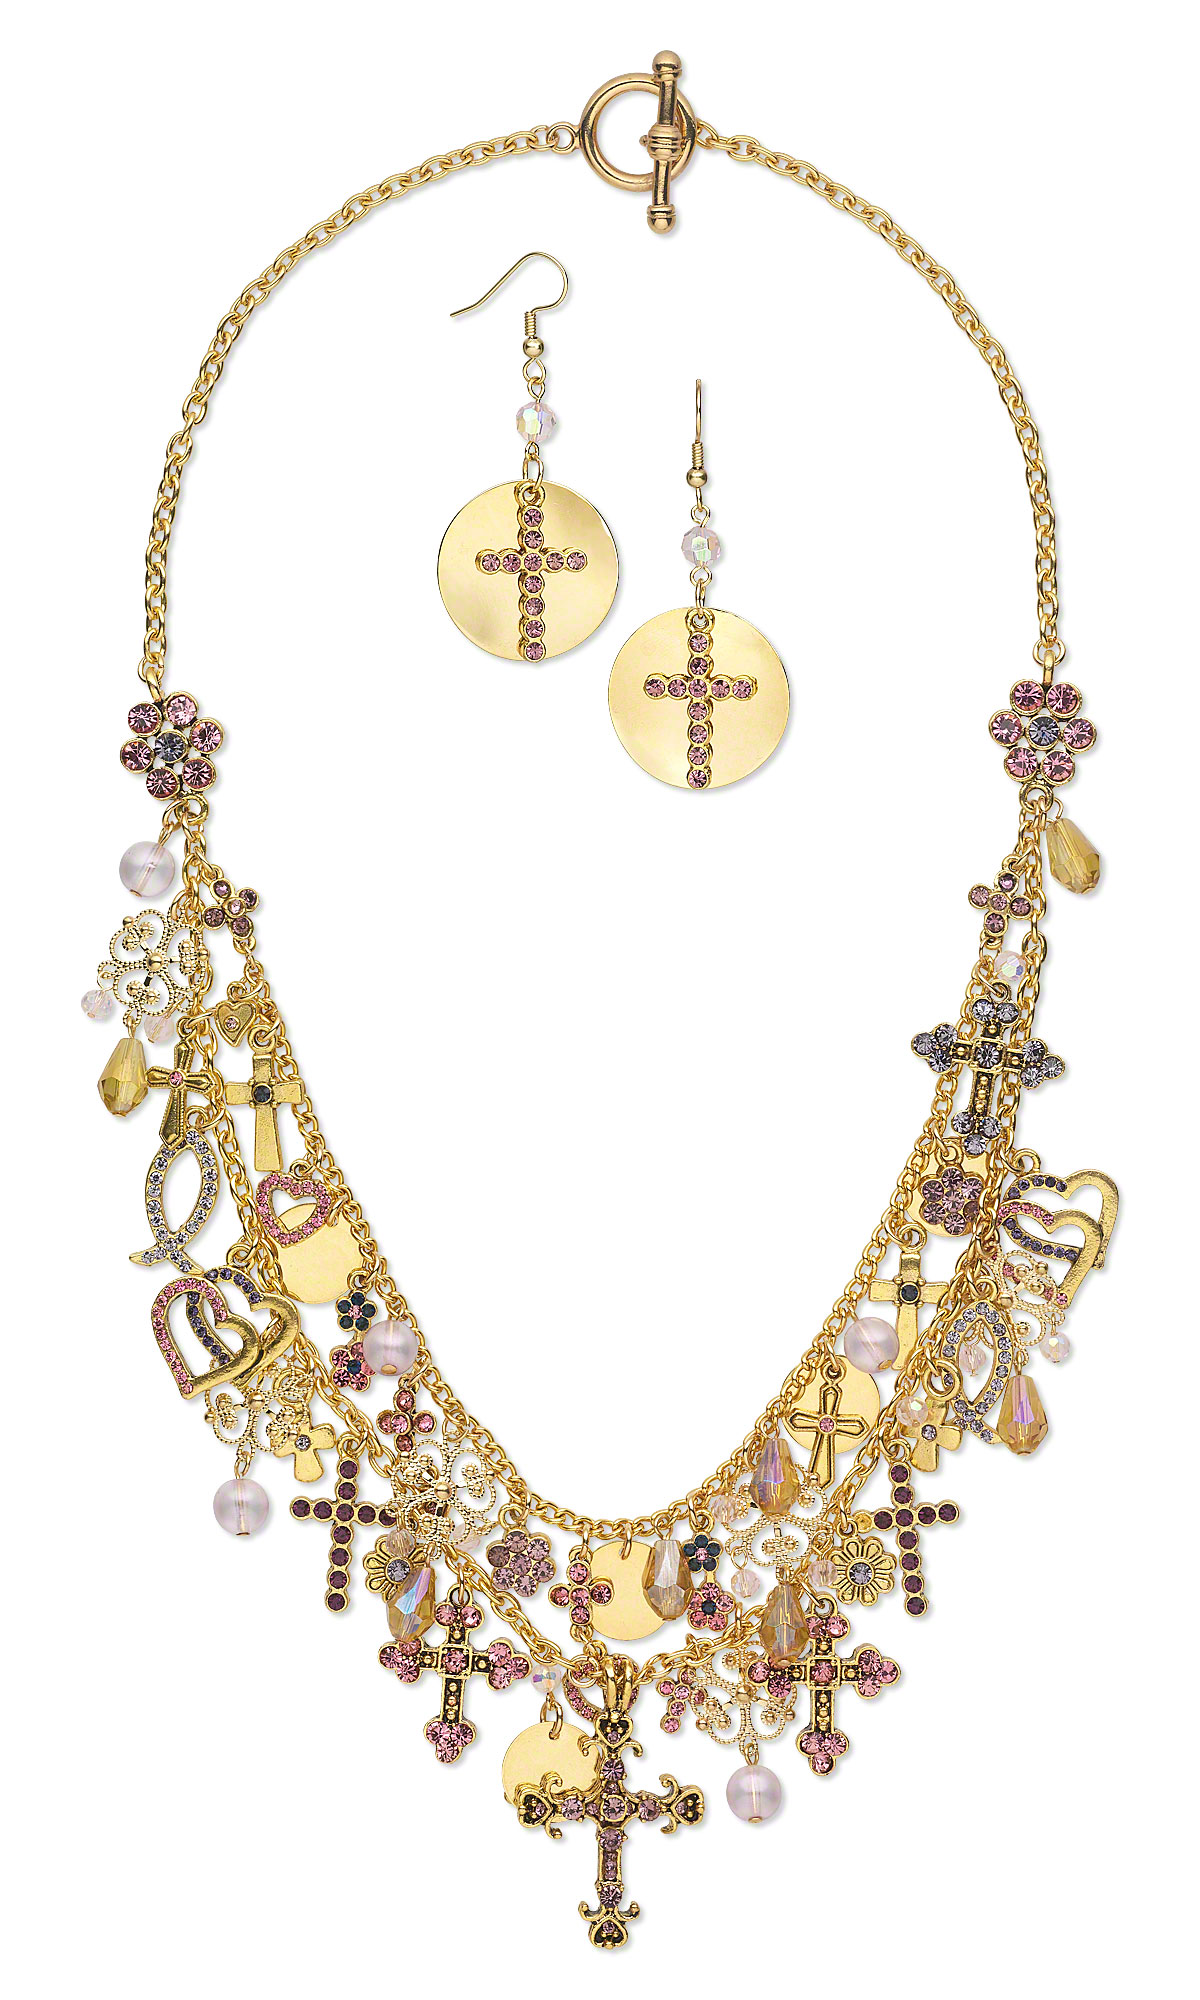 Jewelry Design - Double-Strand Necklace and Earring Set Antiqued Gold ...